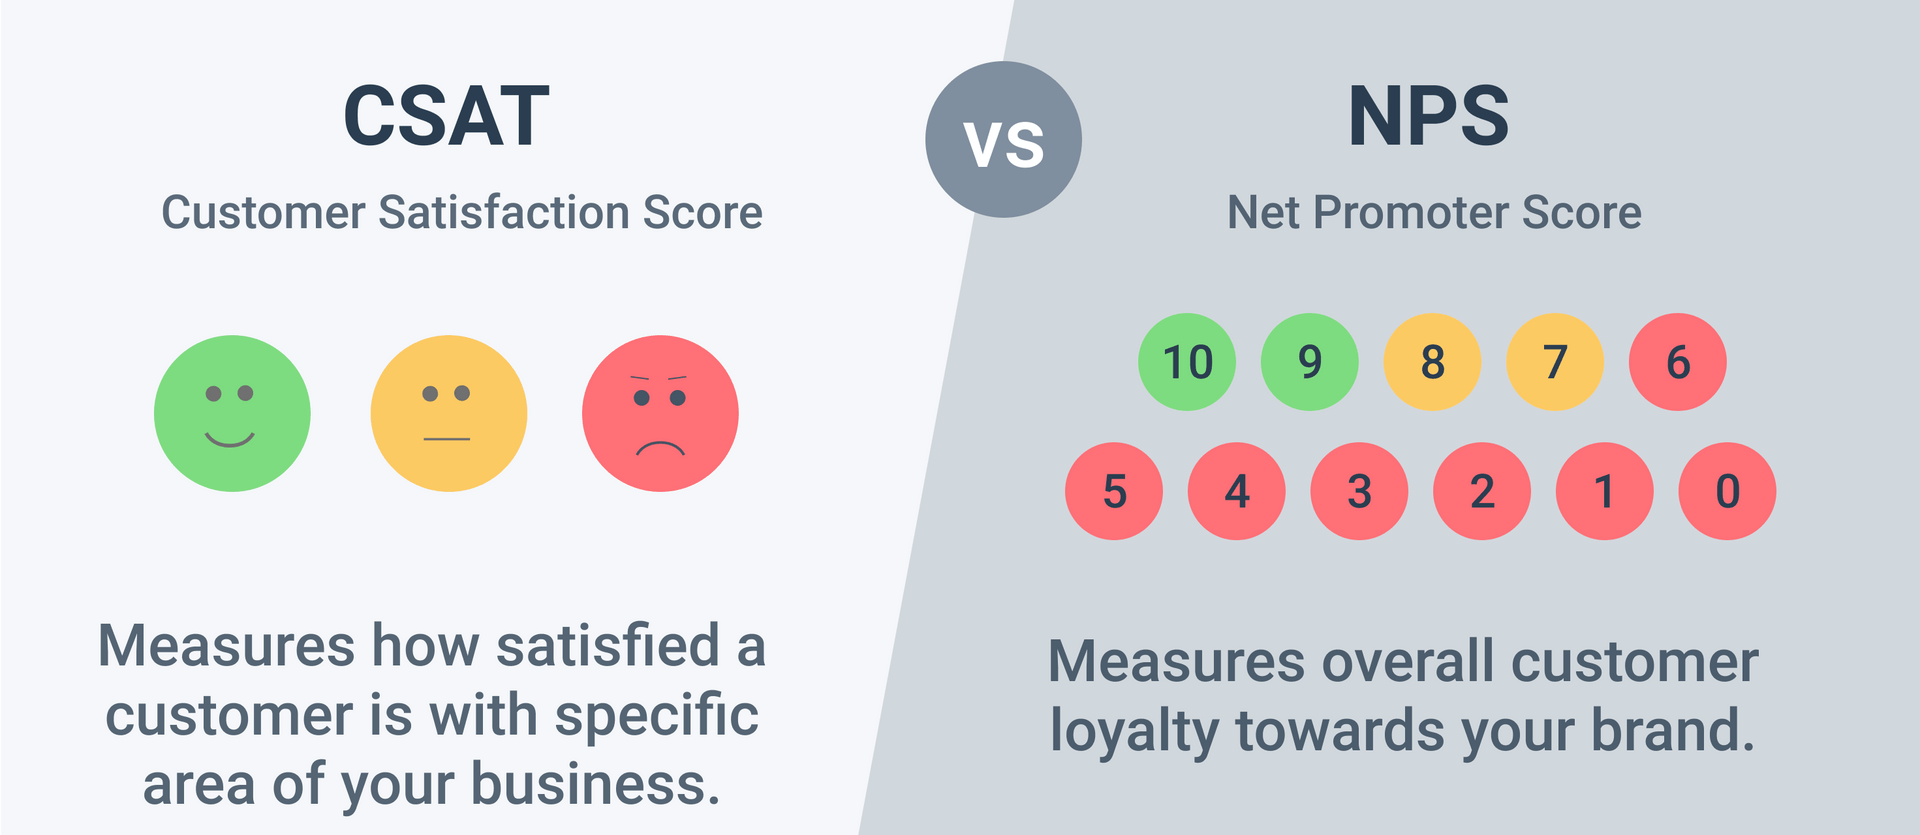 The difference between CSAT and NPS, they are the indicators to measure the performance of CRM